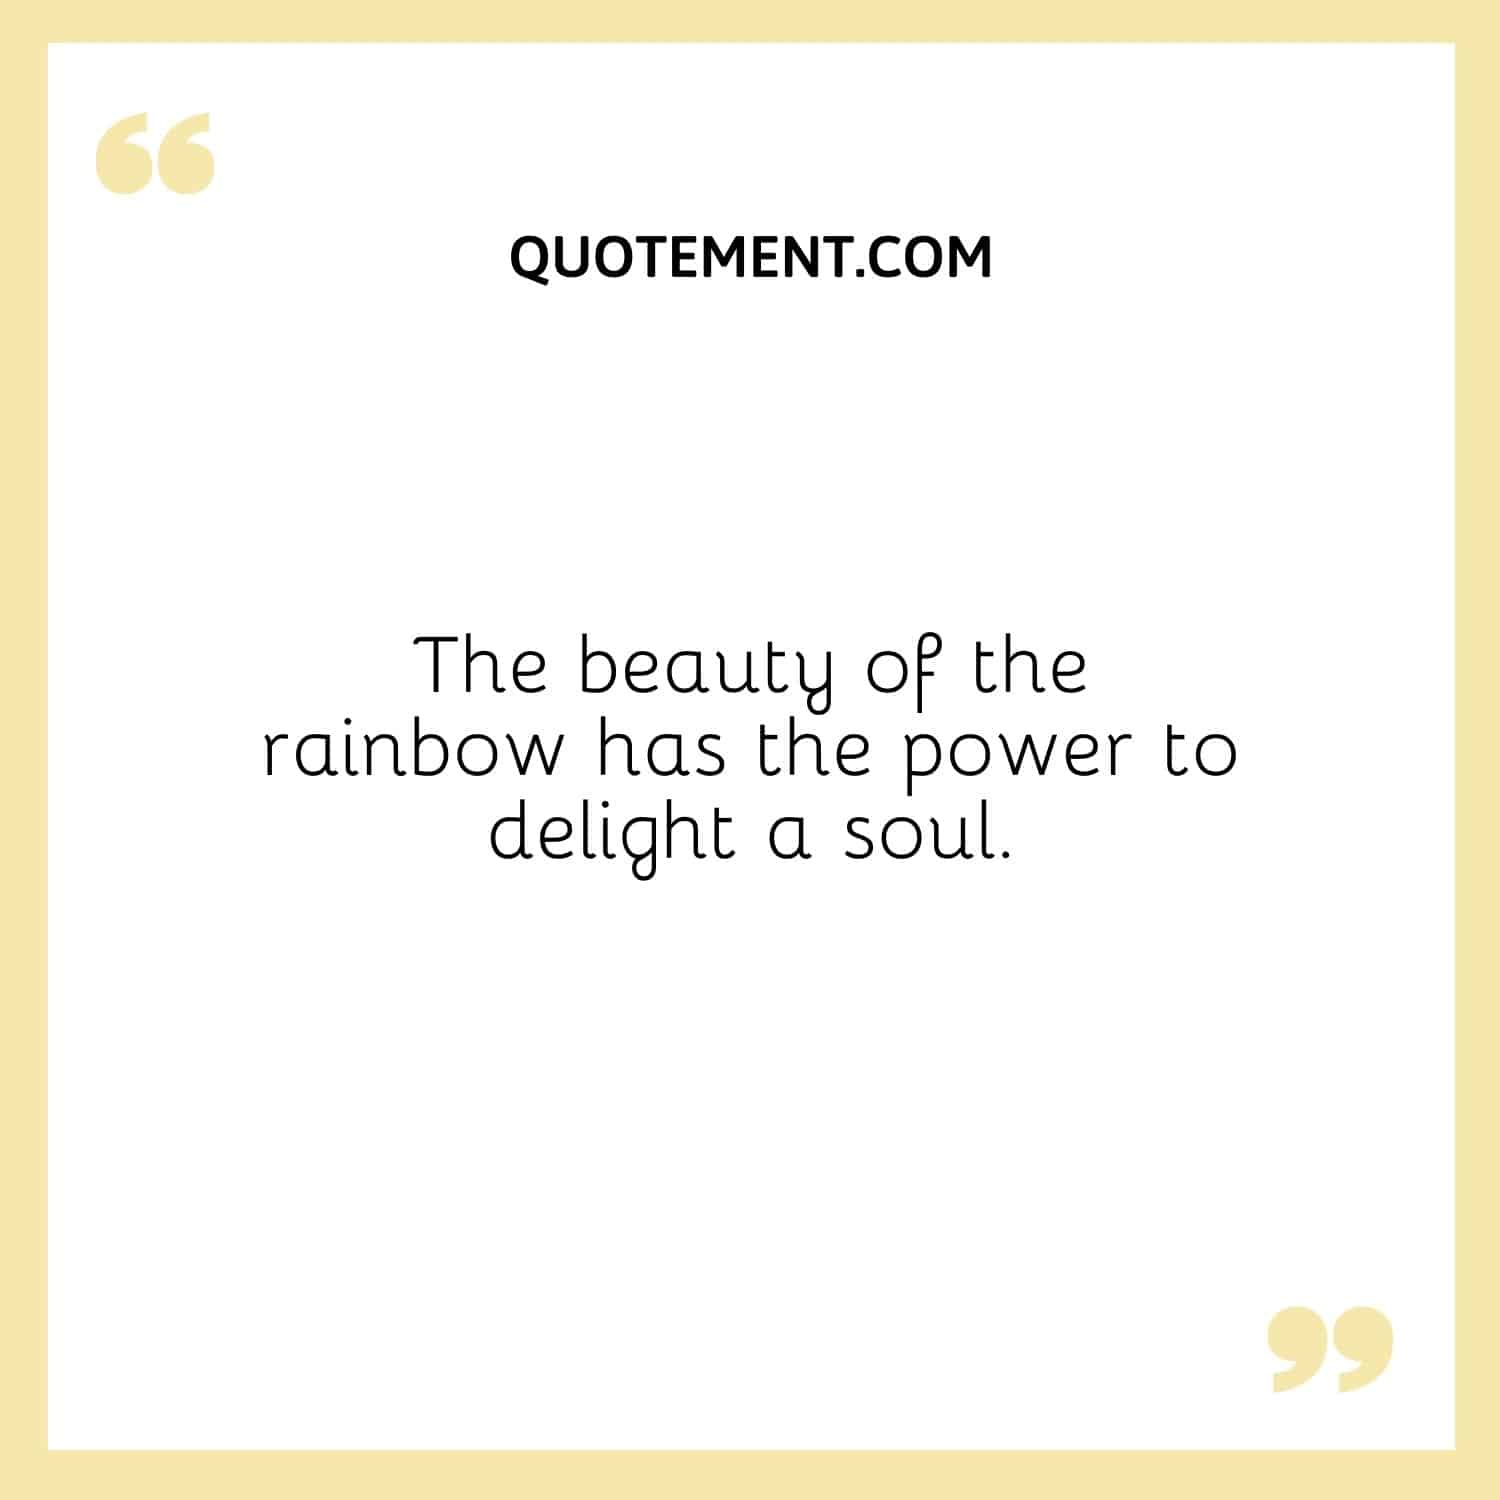 The beauty of the rainbow has the power to delight a soul